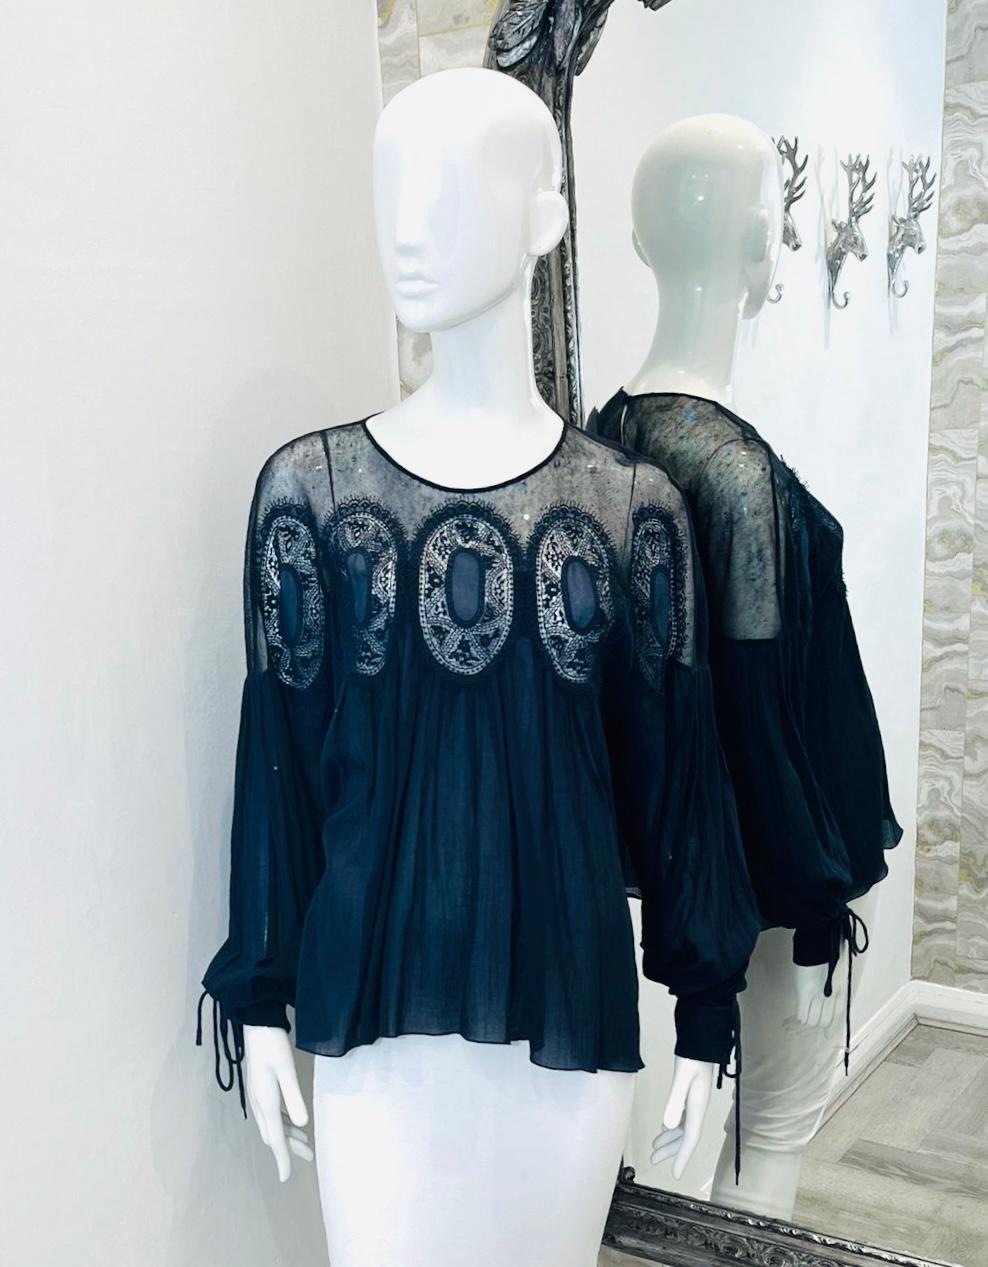 Chloe Cotton & Linen Blouse

Navy sheer blouse designed with lace and crochet detailing.

Featuring long, balloon sleeves with self-tied cuffs.

Styled with round neckline, key-hole closure to rear and loose-fit silhouette.

Size – 40FR

Condition –